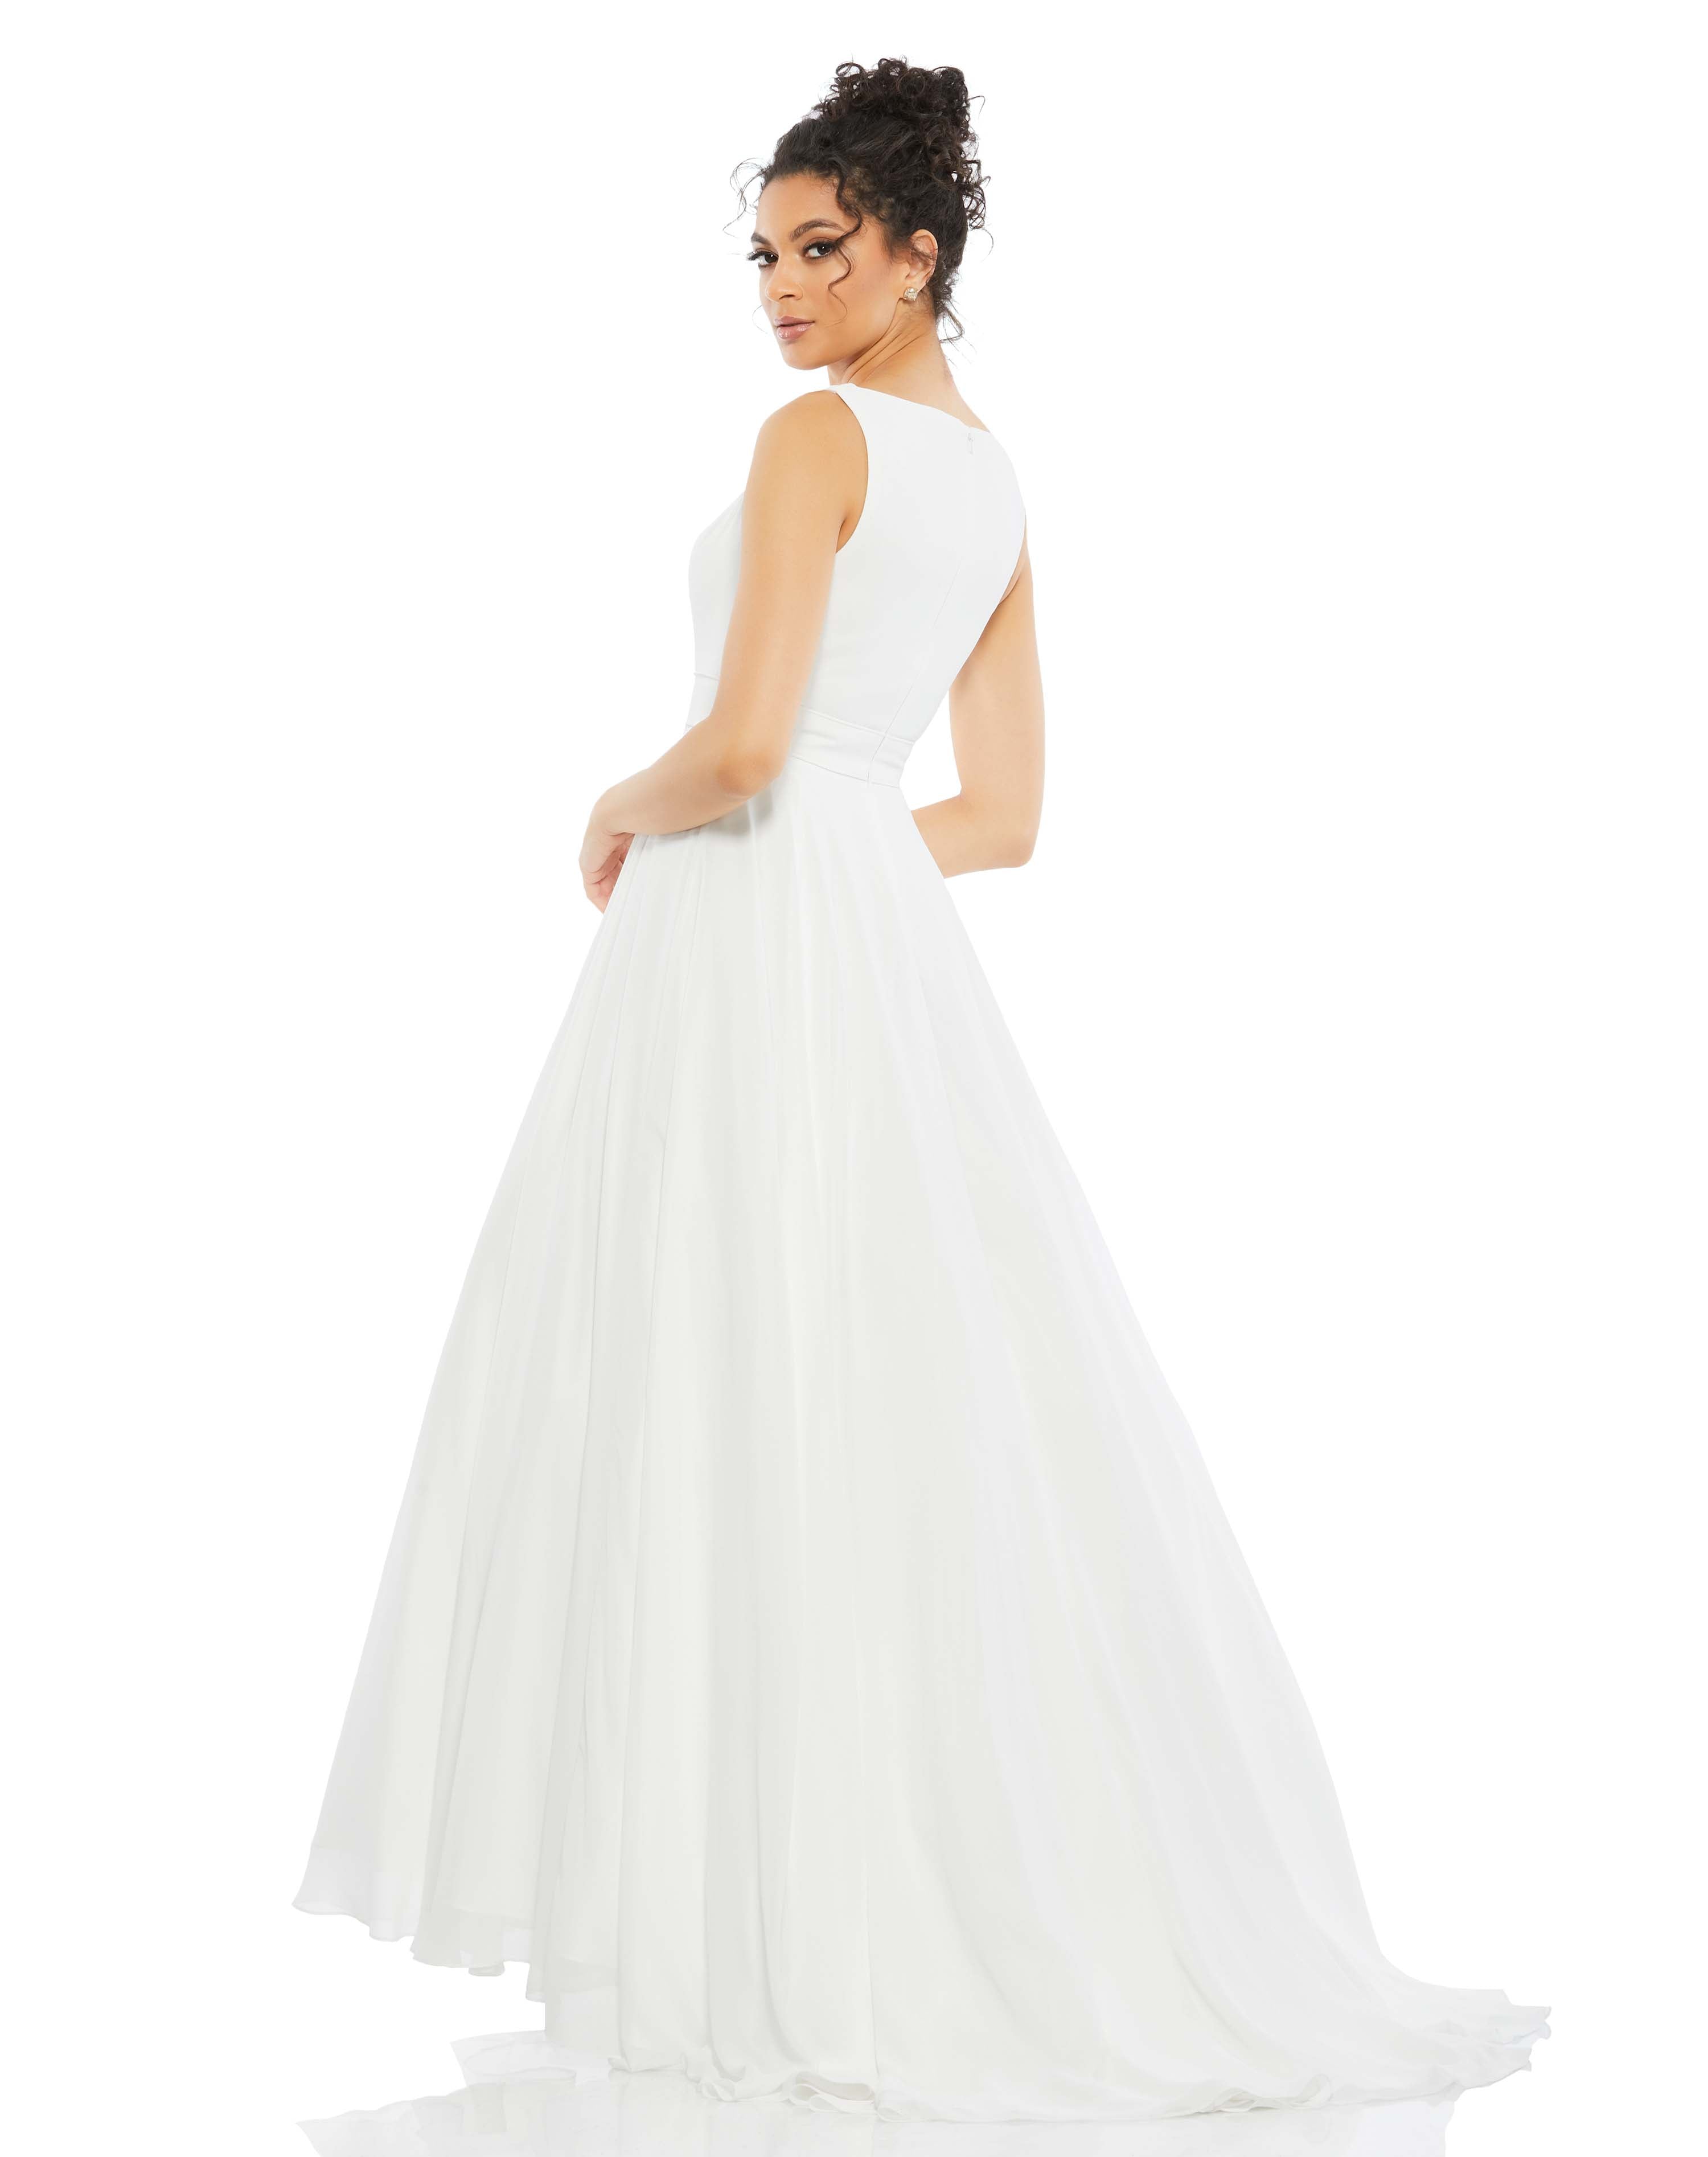 Layered Tulle Chiffon Ball Gown - FINAL SALE